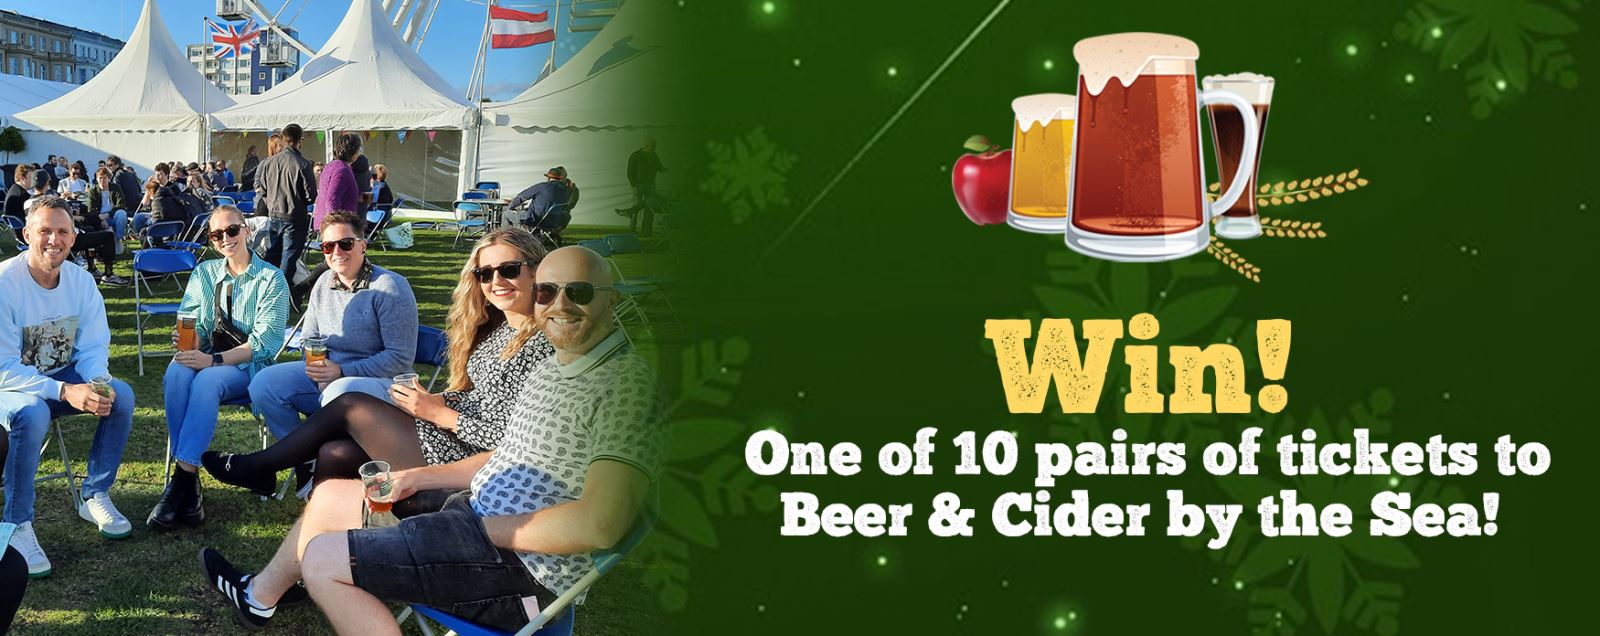 Win tickets to Beer & Cider by the Sea